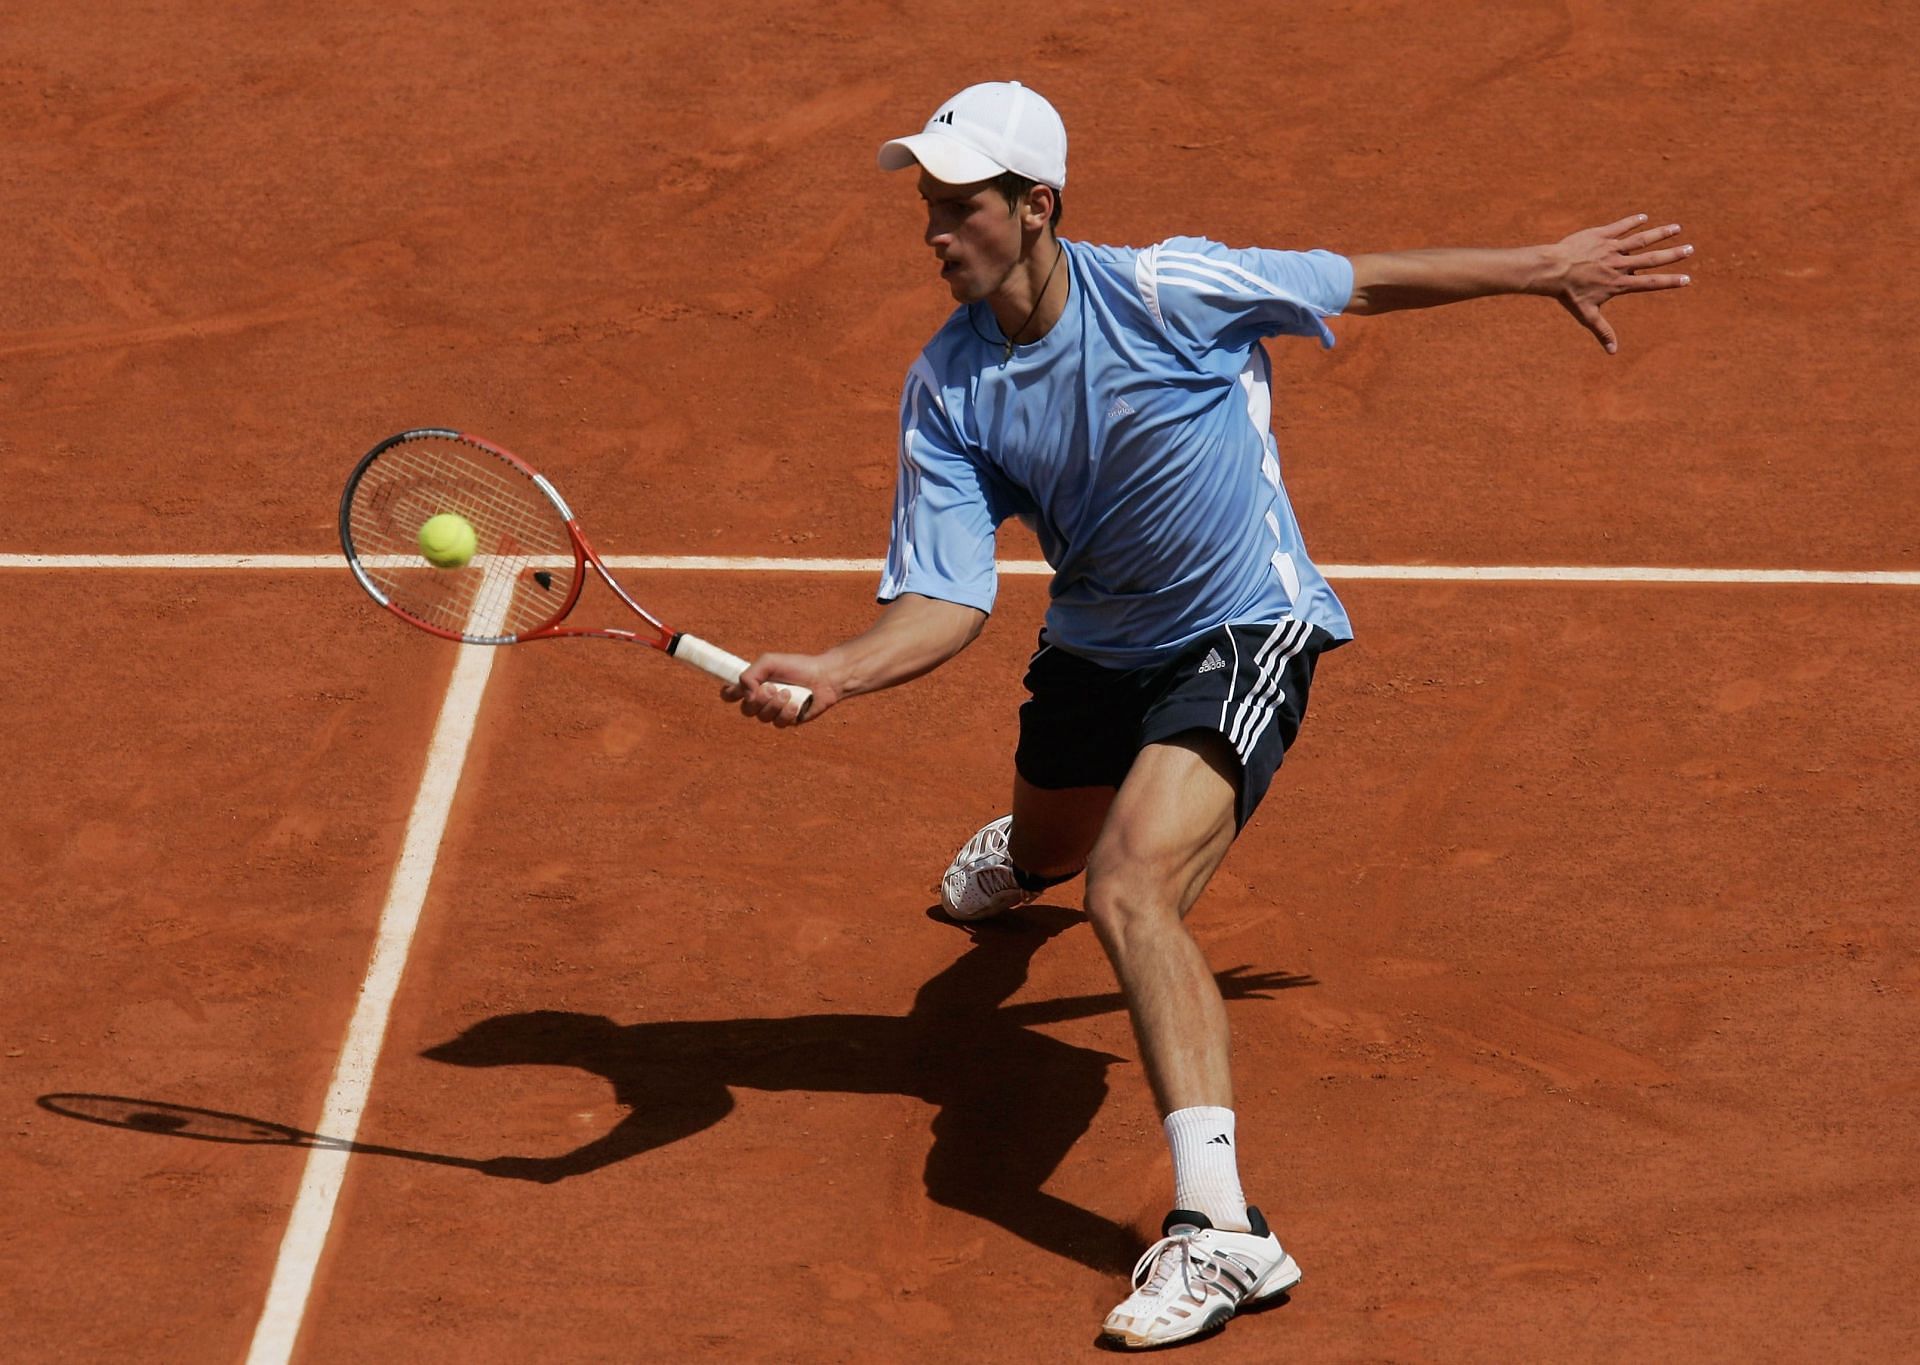 Novak Djokovic dropped only four games in his Roland Garros opener on Monday